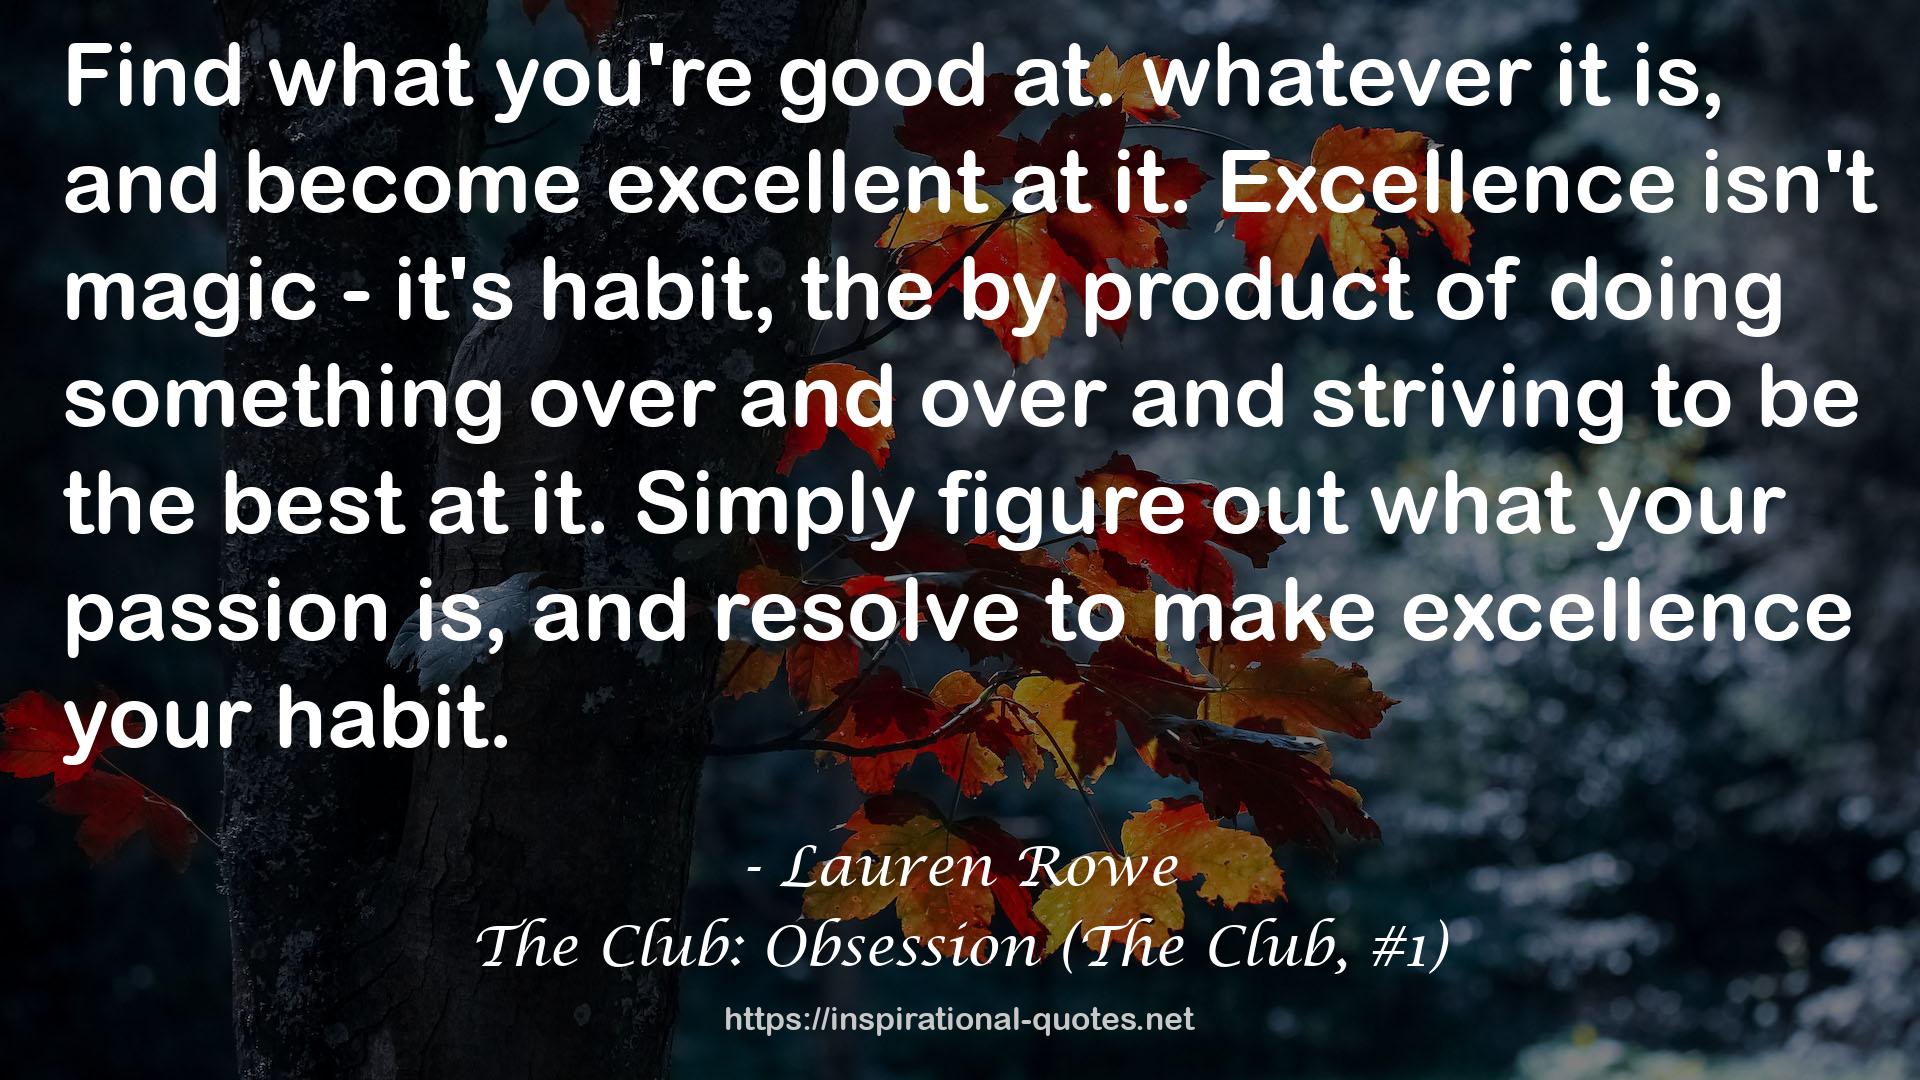 The Club: Obsession (The Club, #1) QUOTES